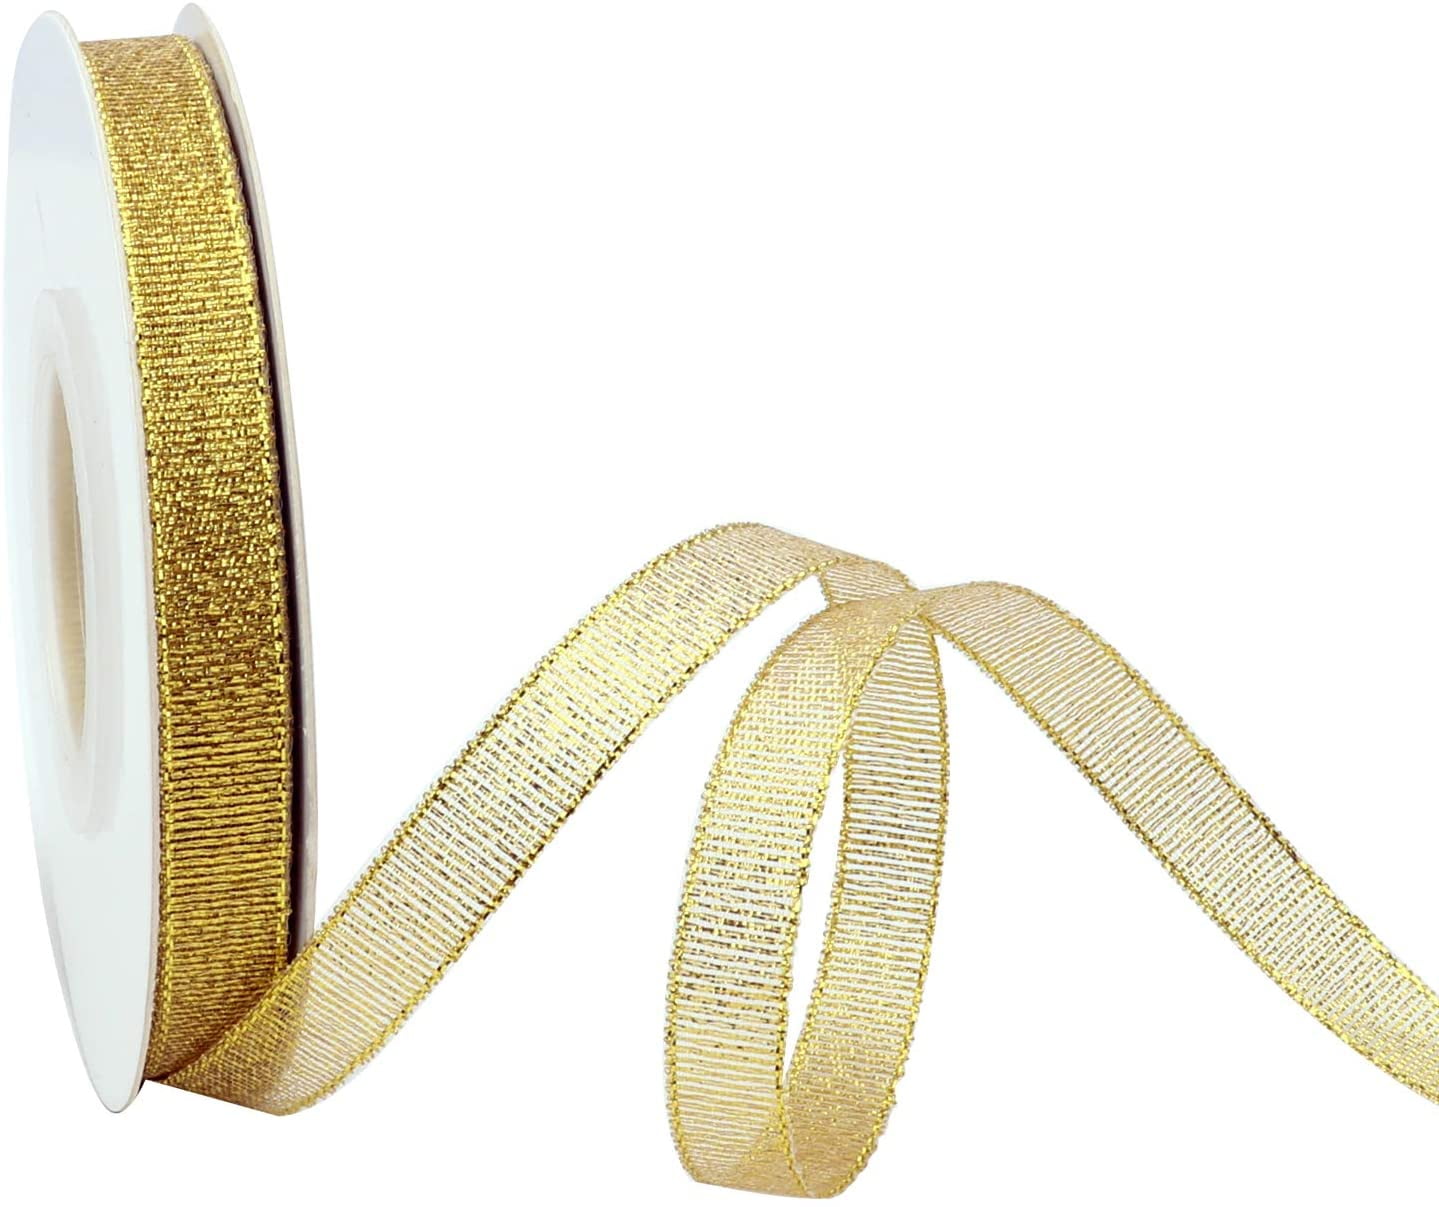 Satin  Ribbon 10mm faced 25Yards   High Quality Double 